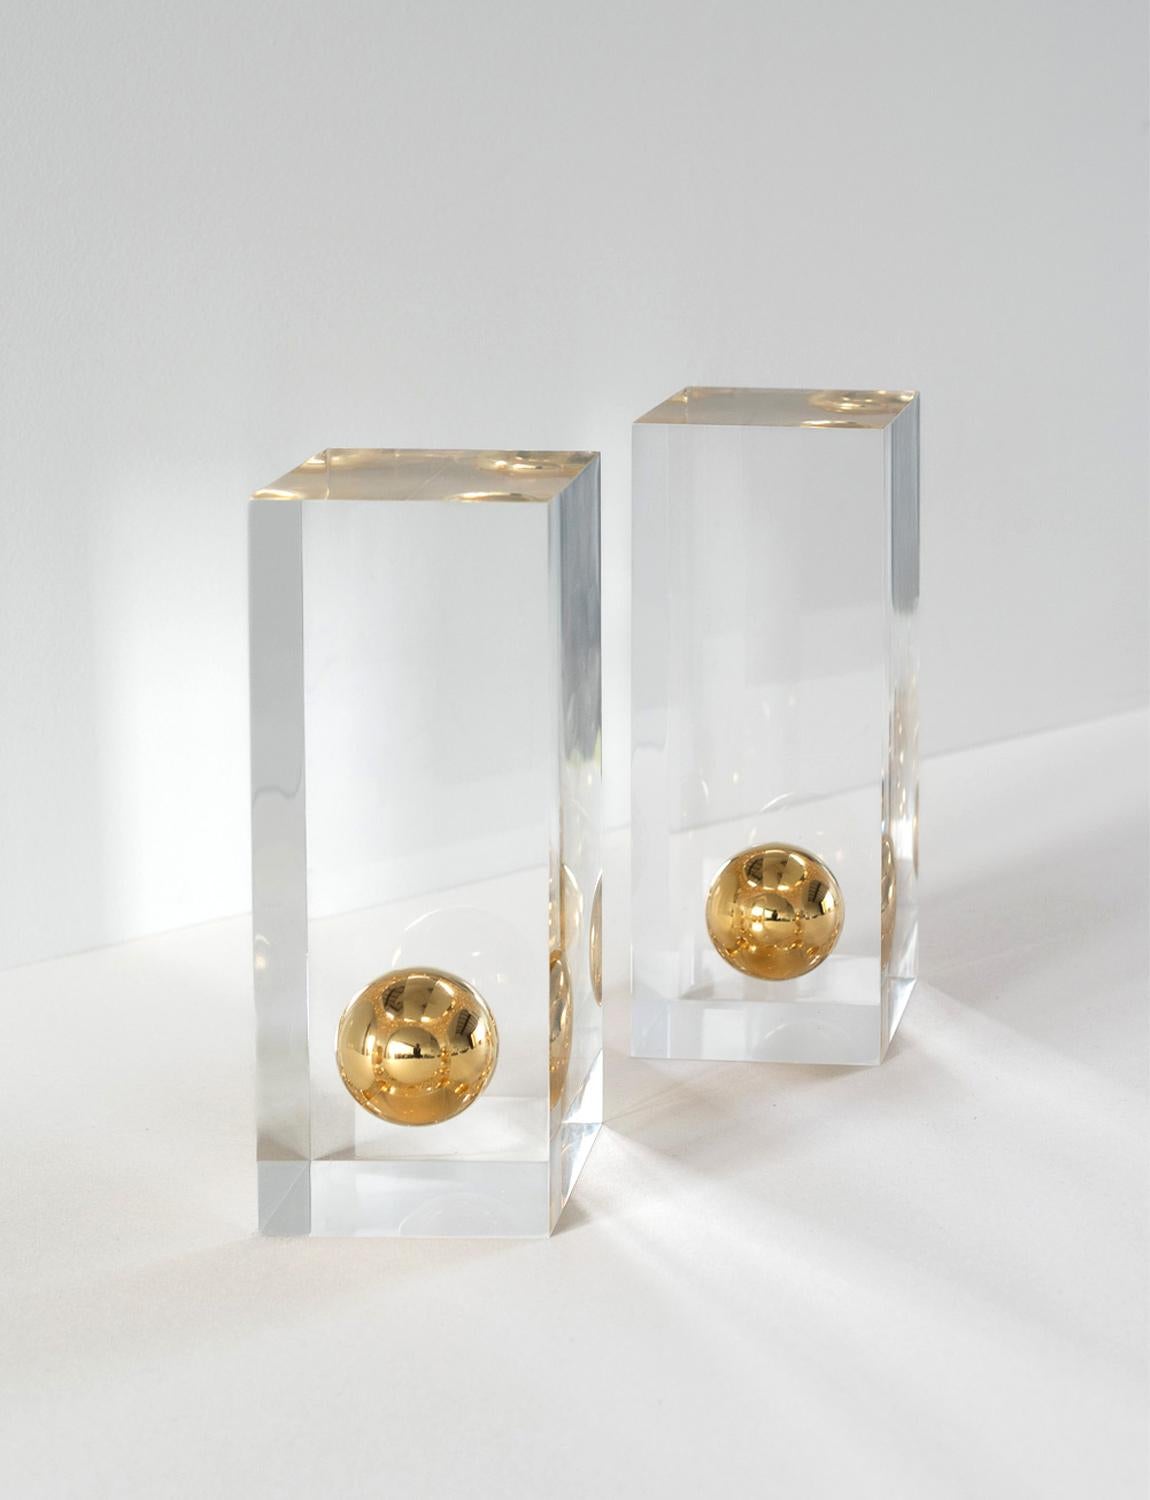 A wonderful pair of plexiglass ornaments designed by Willy Rizzo (1928 -2013) for Metal Art in the 1970s. A suspended gold orb sits within each ornament. They can be used as purely decorative pieces or as bookends. Willy Rizzo was a renowned Italian